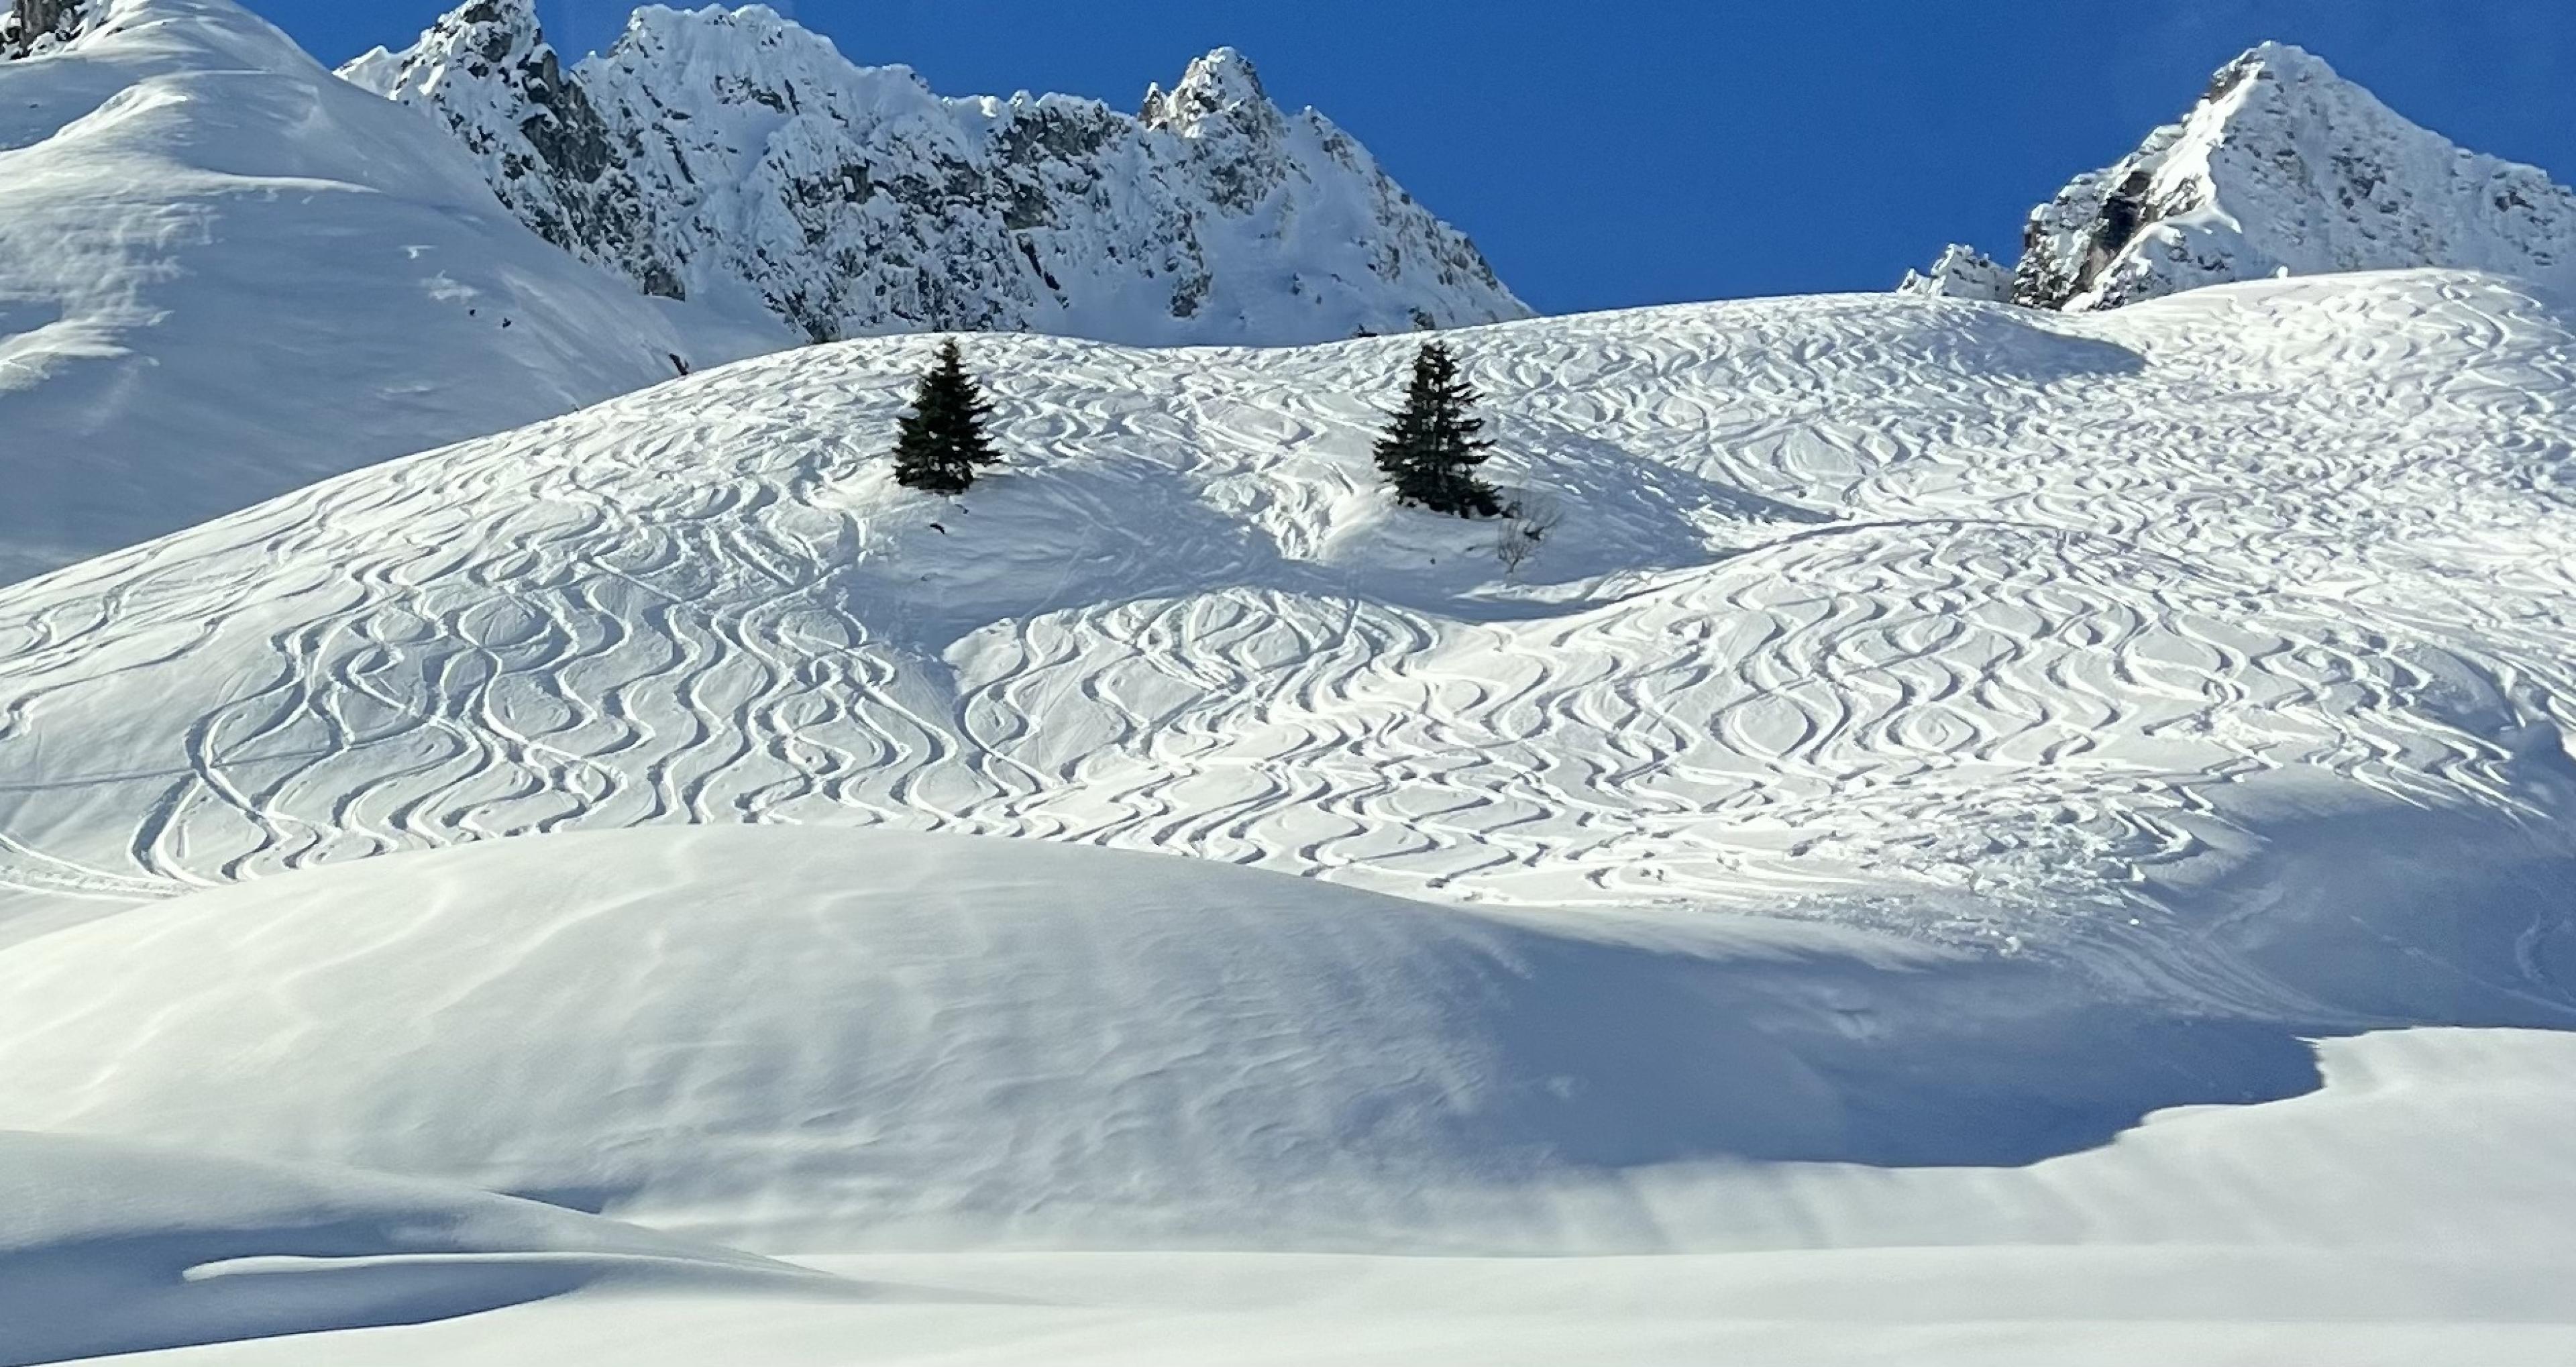 looking up at ski slopes with ski tracks on a snowy alpine mountain